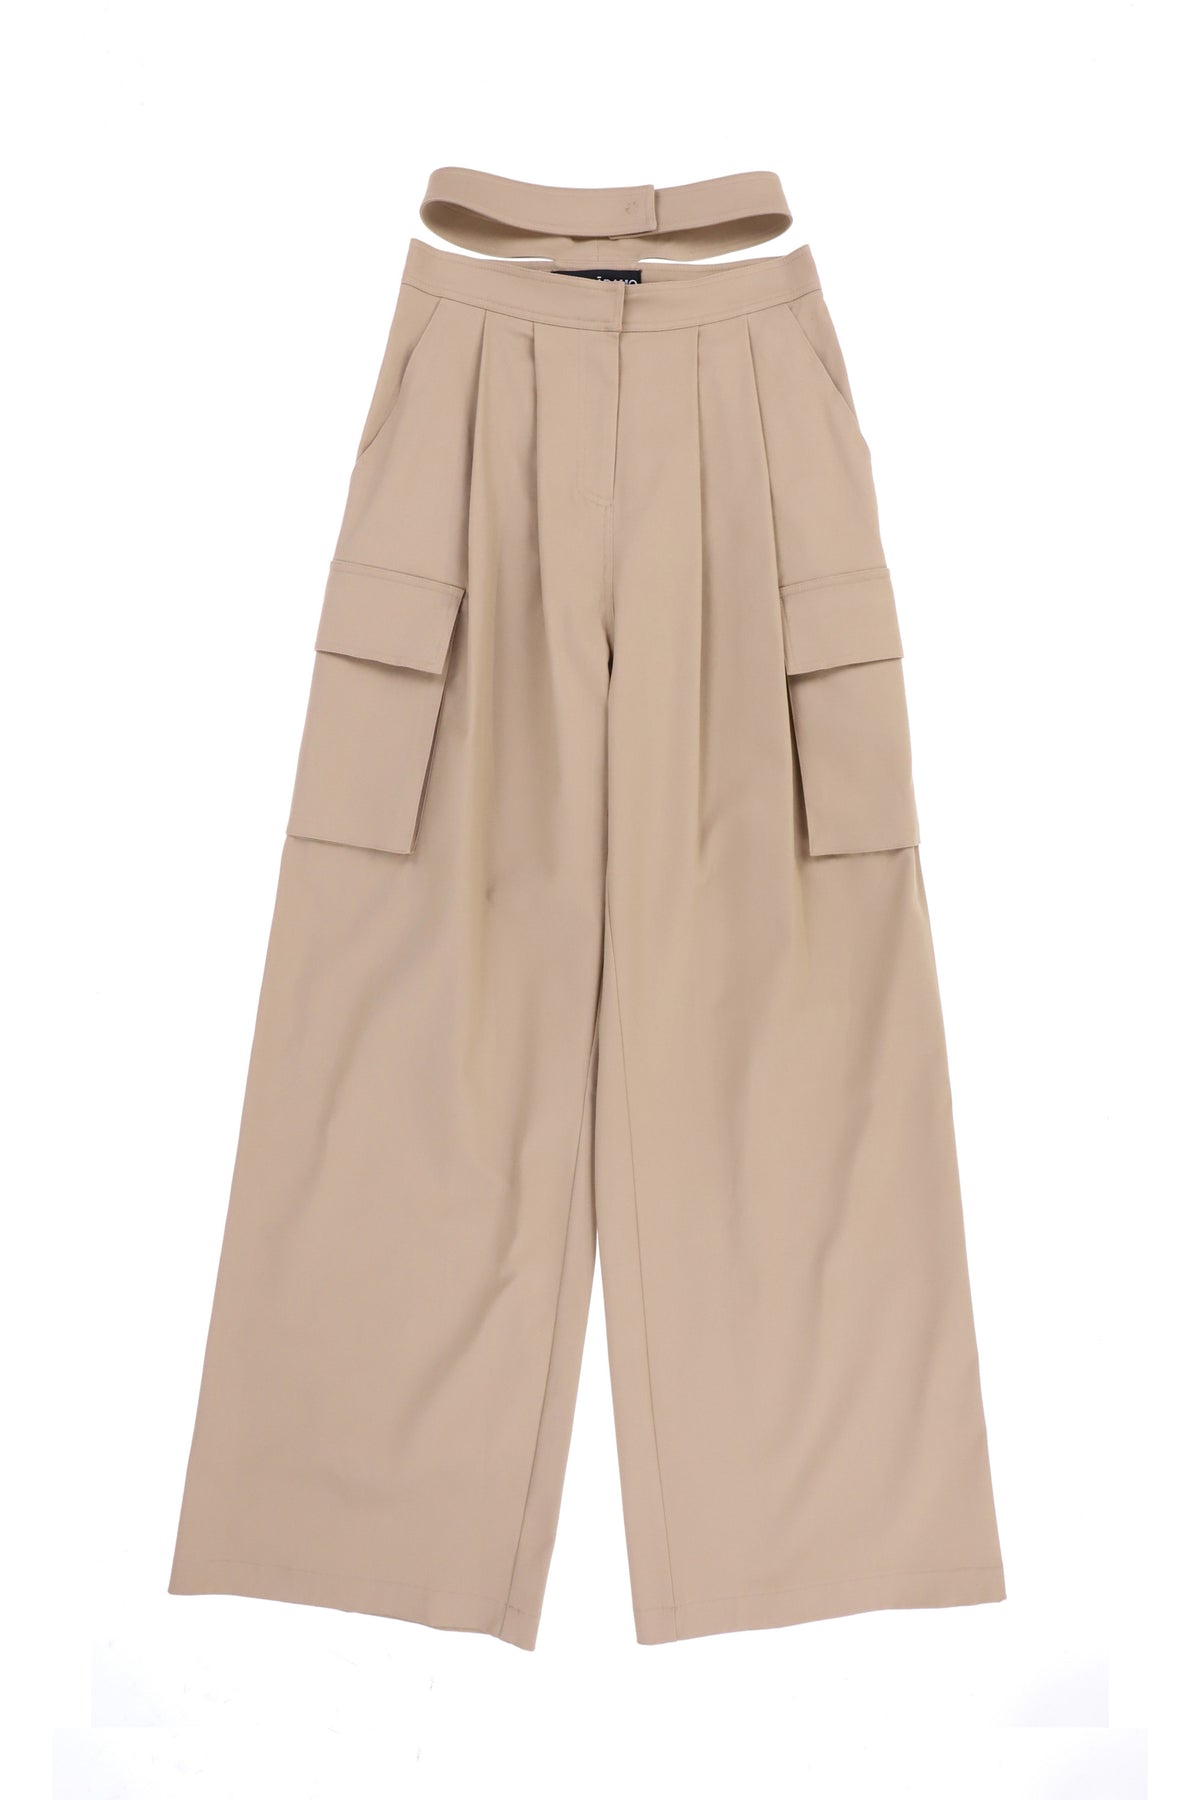 PANTS WITH DOUBLE BELT / NUDE